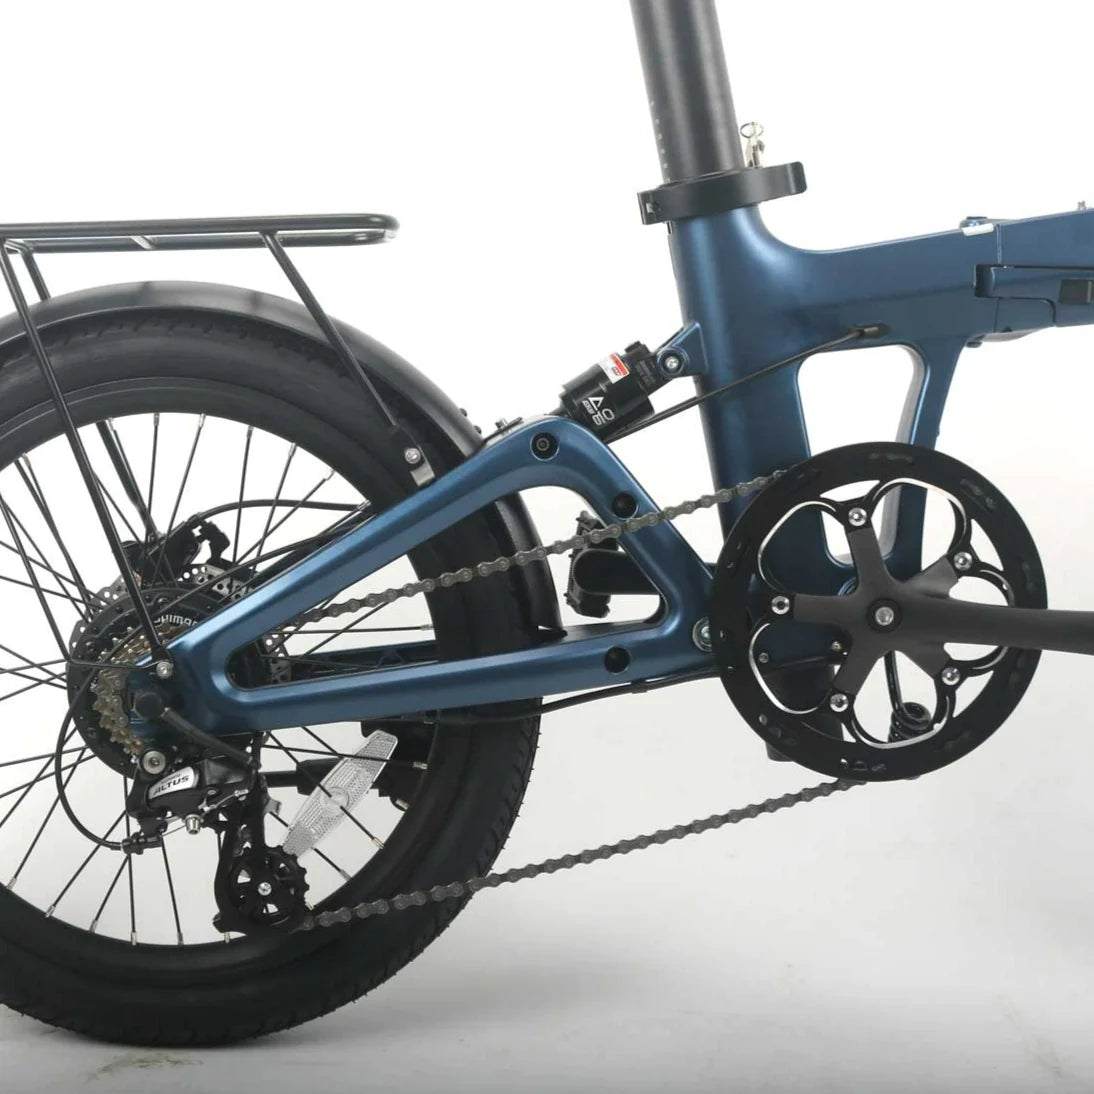 A close up photo of the drivetrain and rear wheel of the Kuma F1 folding electric bike which is available to buy from Bleeper.